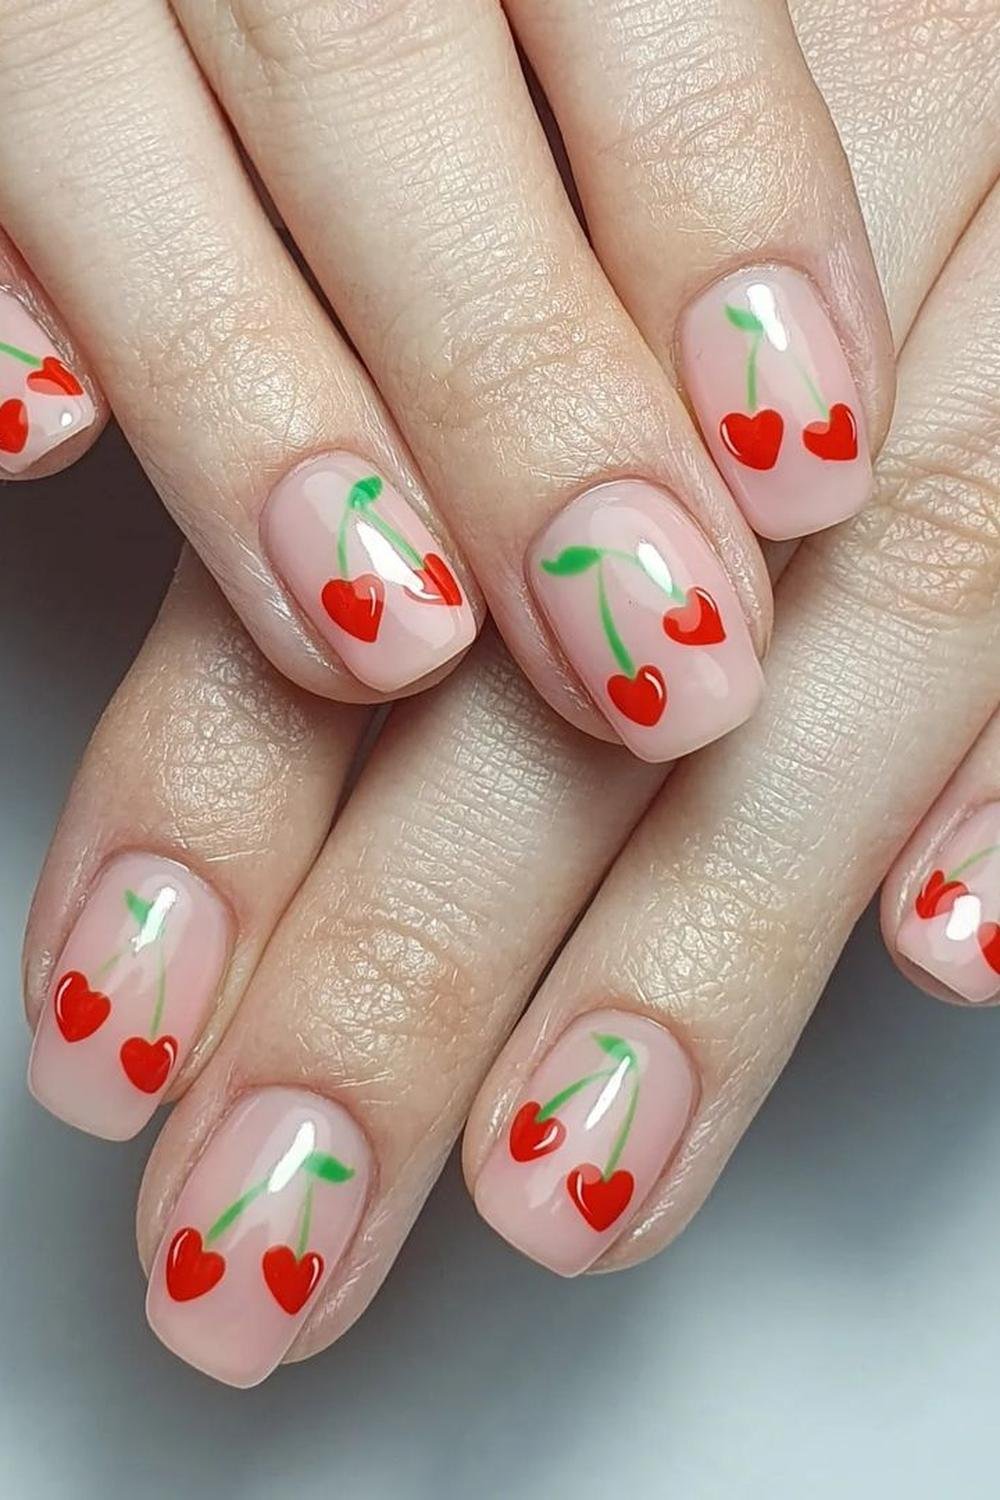 24 - Picture of Squoval Nails